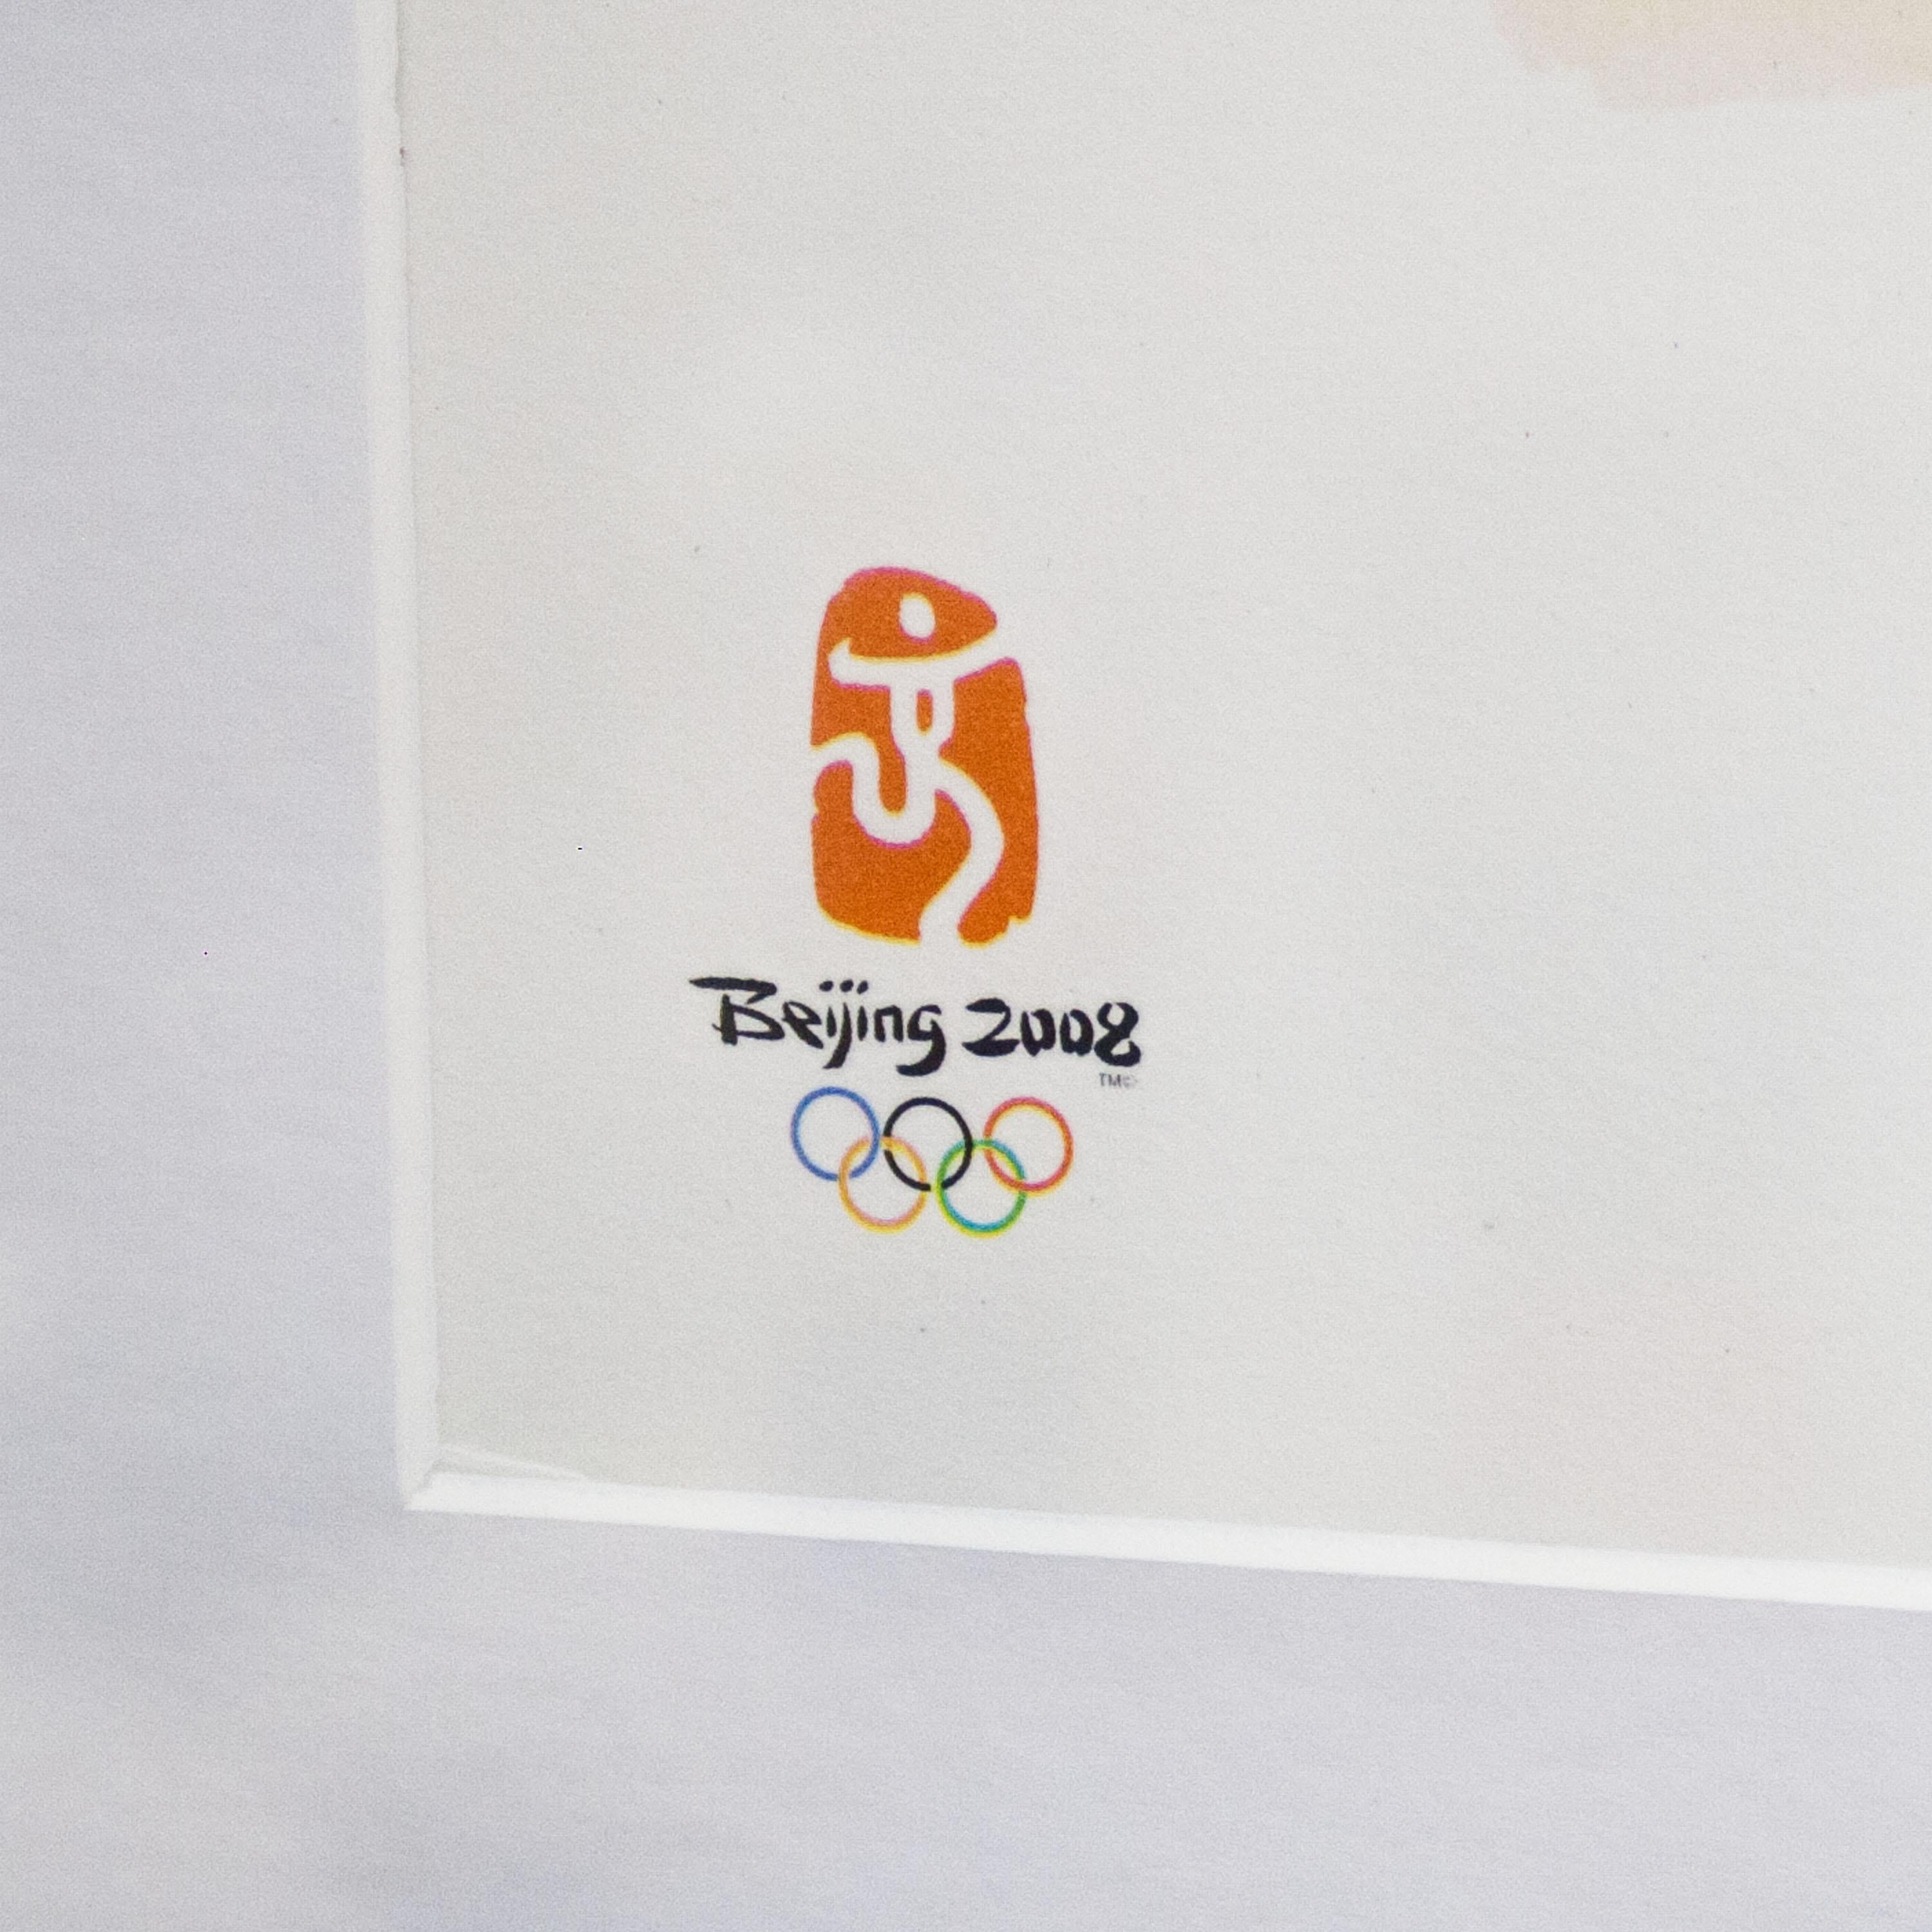 Sandro Chia Olympic Games Beijing 2008 Original Lithography, Italy, 2008 In Excellent Condition For Sale In Madrid, ES